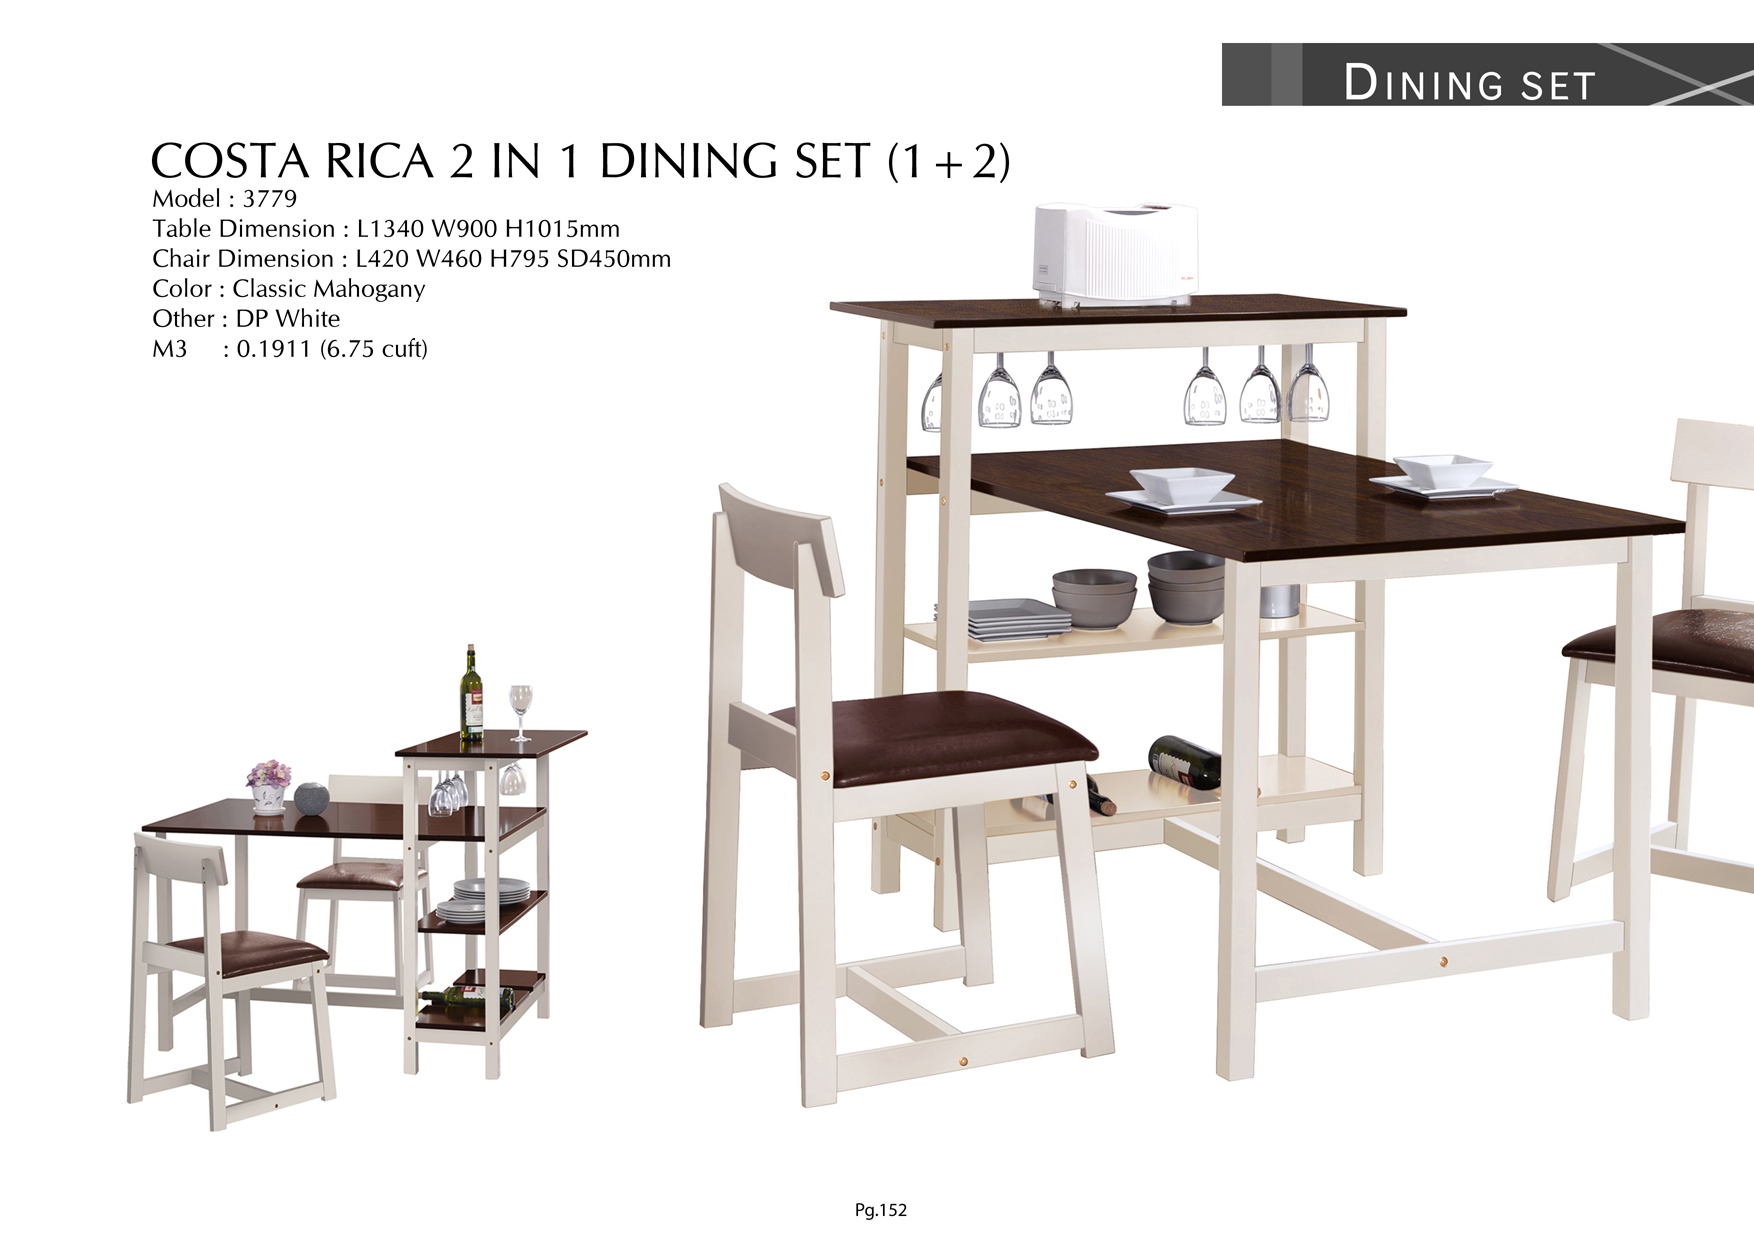 Product: PG152. COSTA RICA 2 IN 1 DINING SET